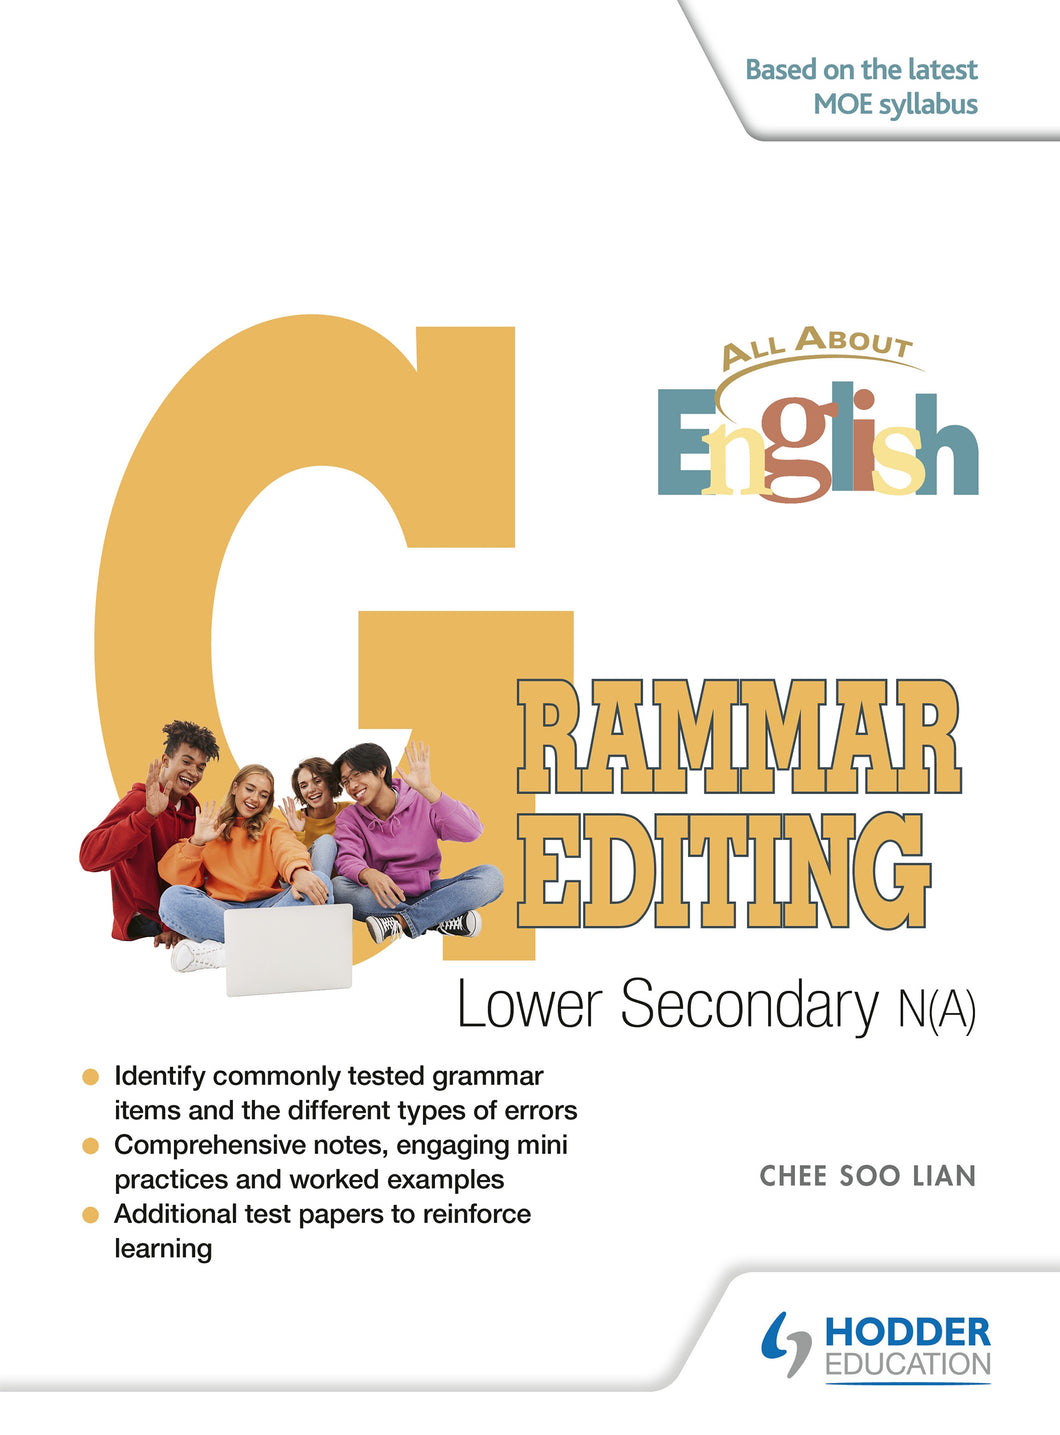 KRSS - English - All About English Grammar Editing for Lower Sec. (Revised Edition) G2